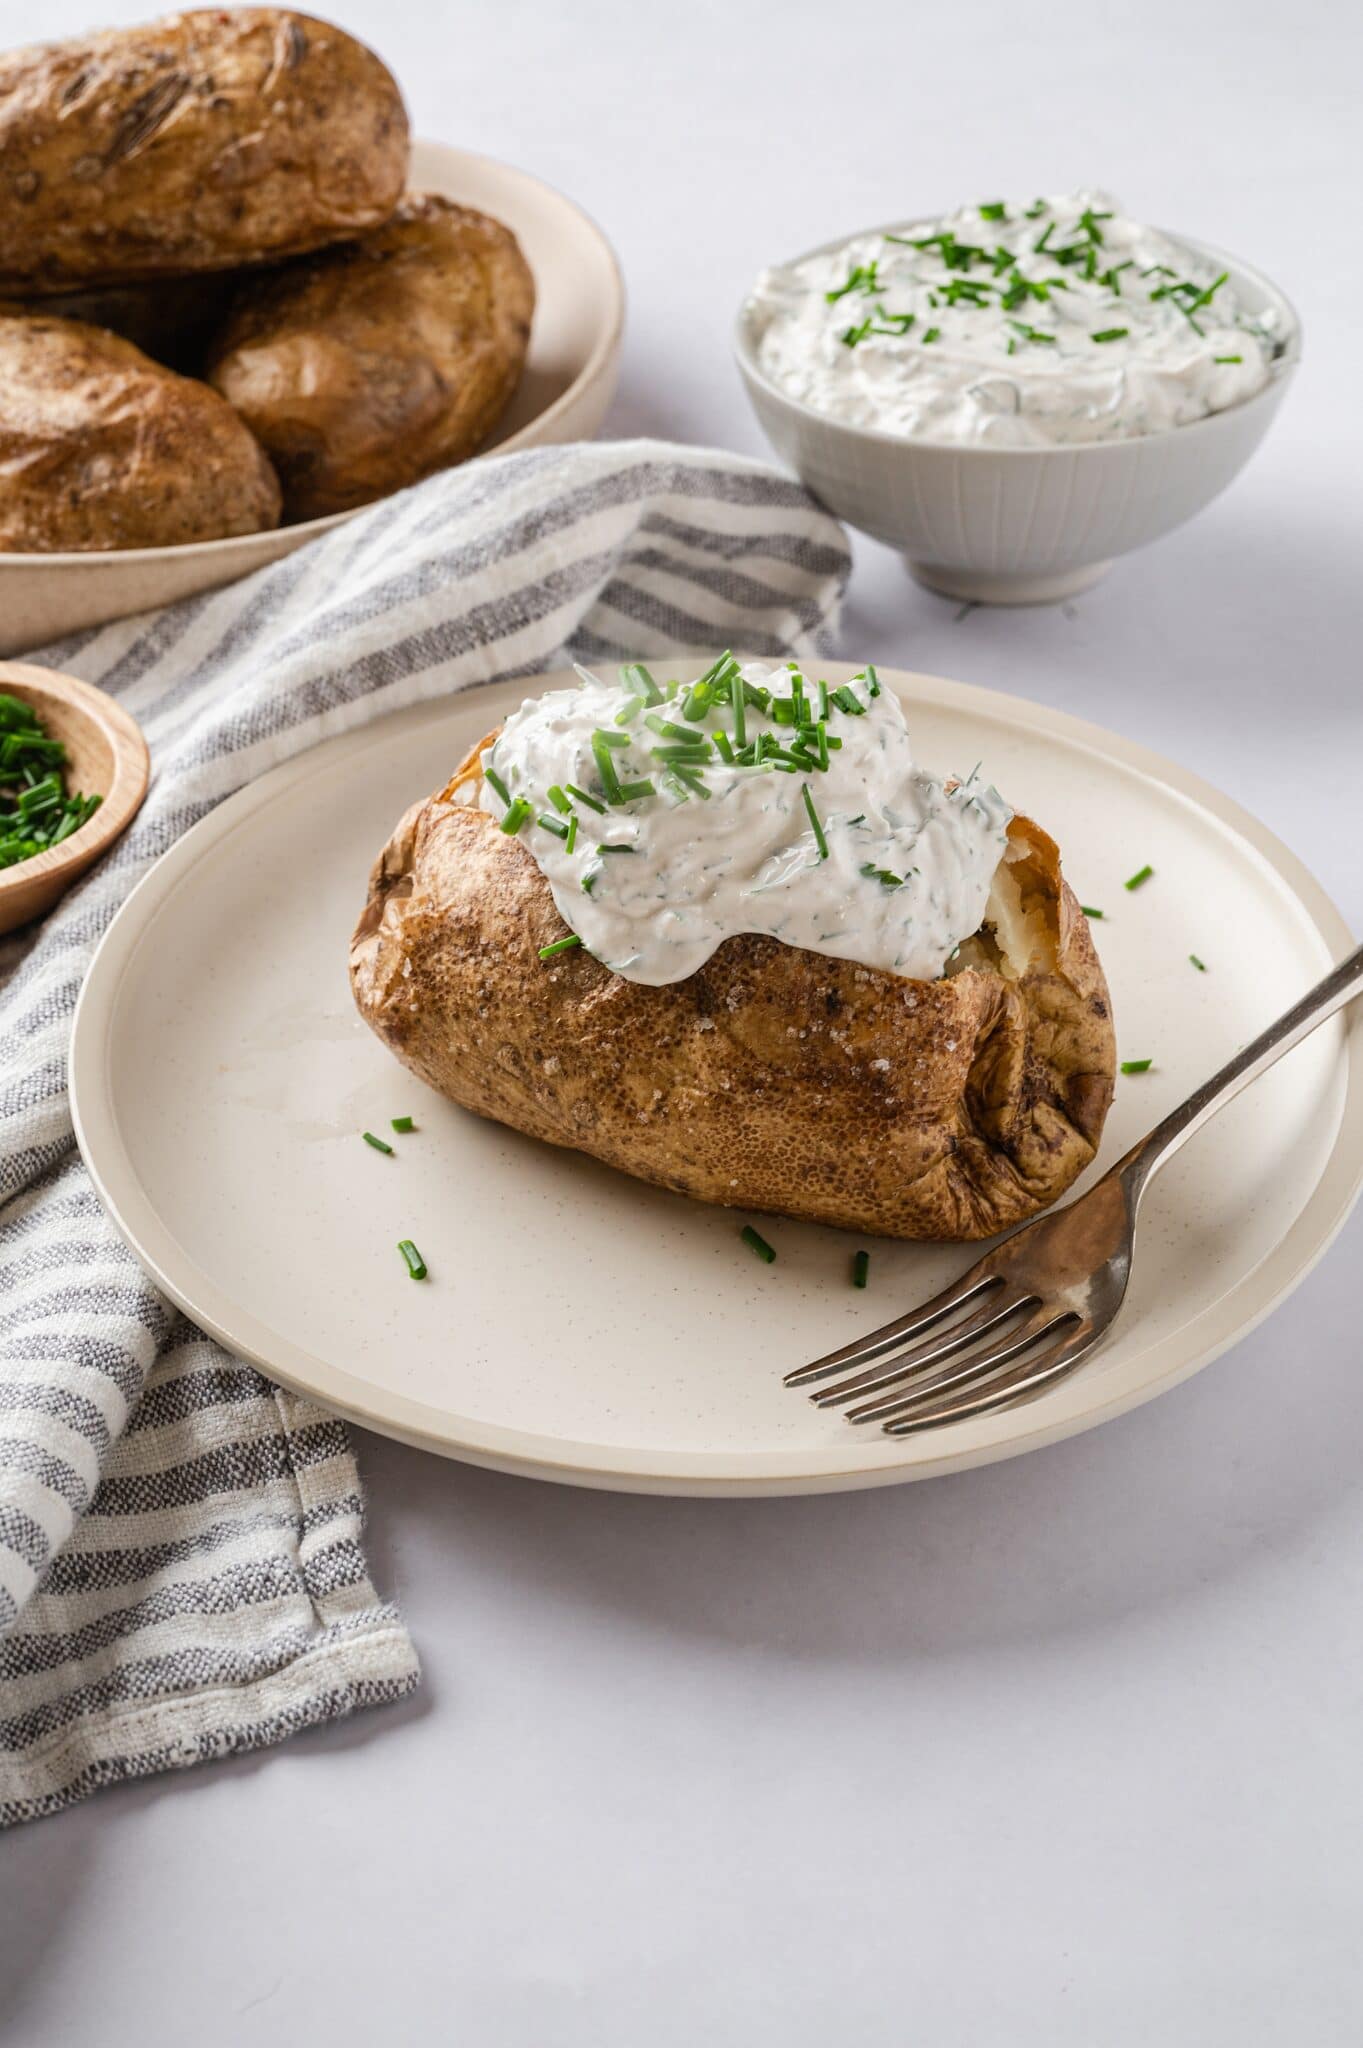 Baked Potatoes with Garlic Herb Sour Cream